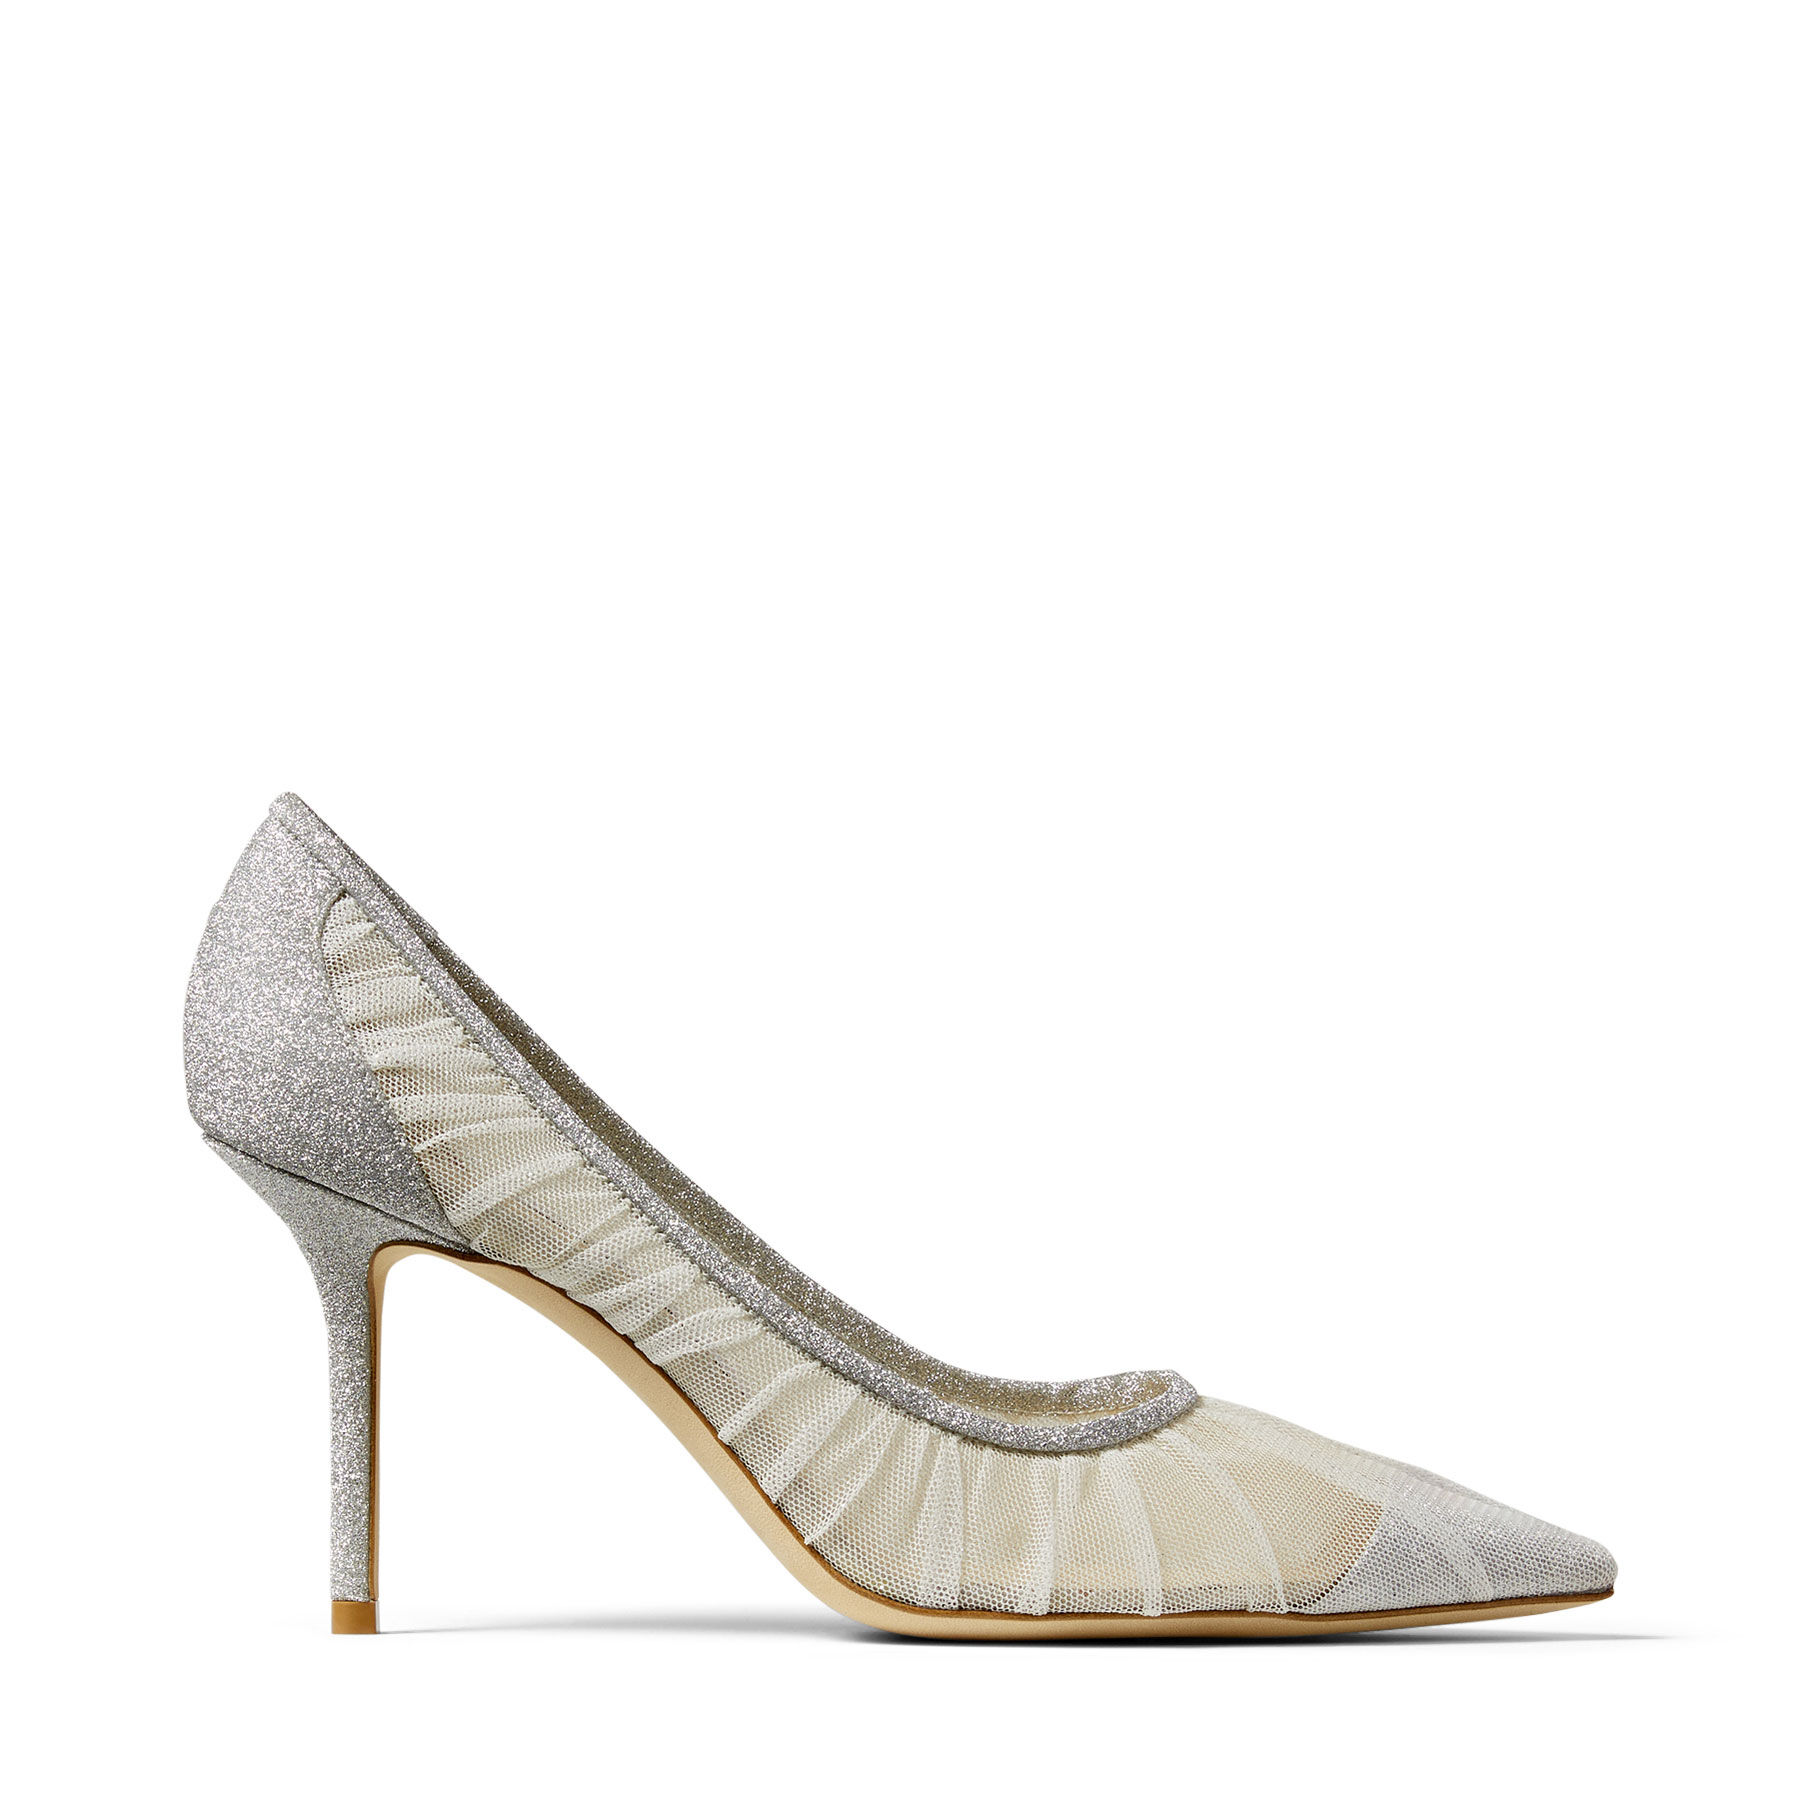 Metallic Glitter Fabric Pumps with Ivory Tulle Overlay | 85 | Cruise '20 |JIMMY CHOO